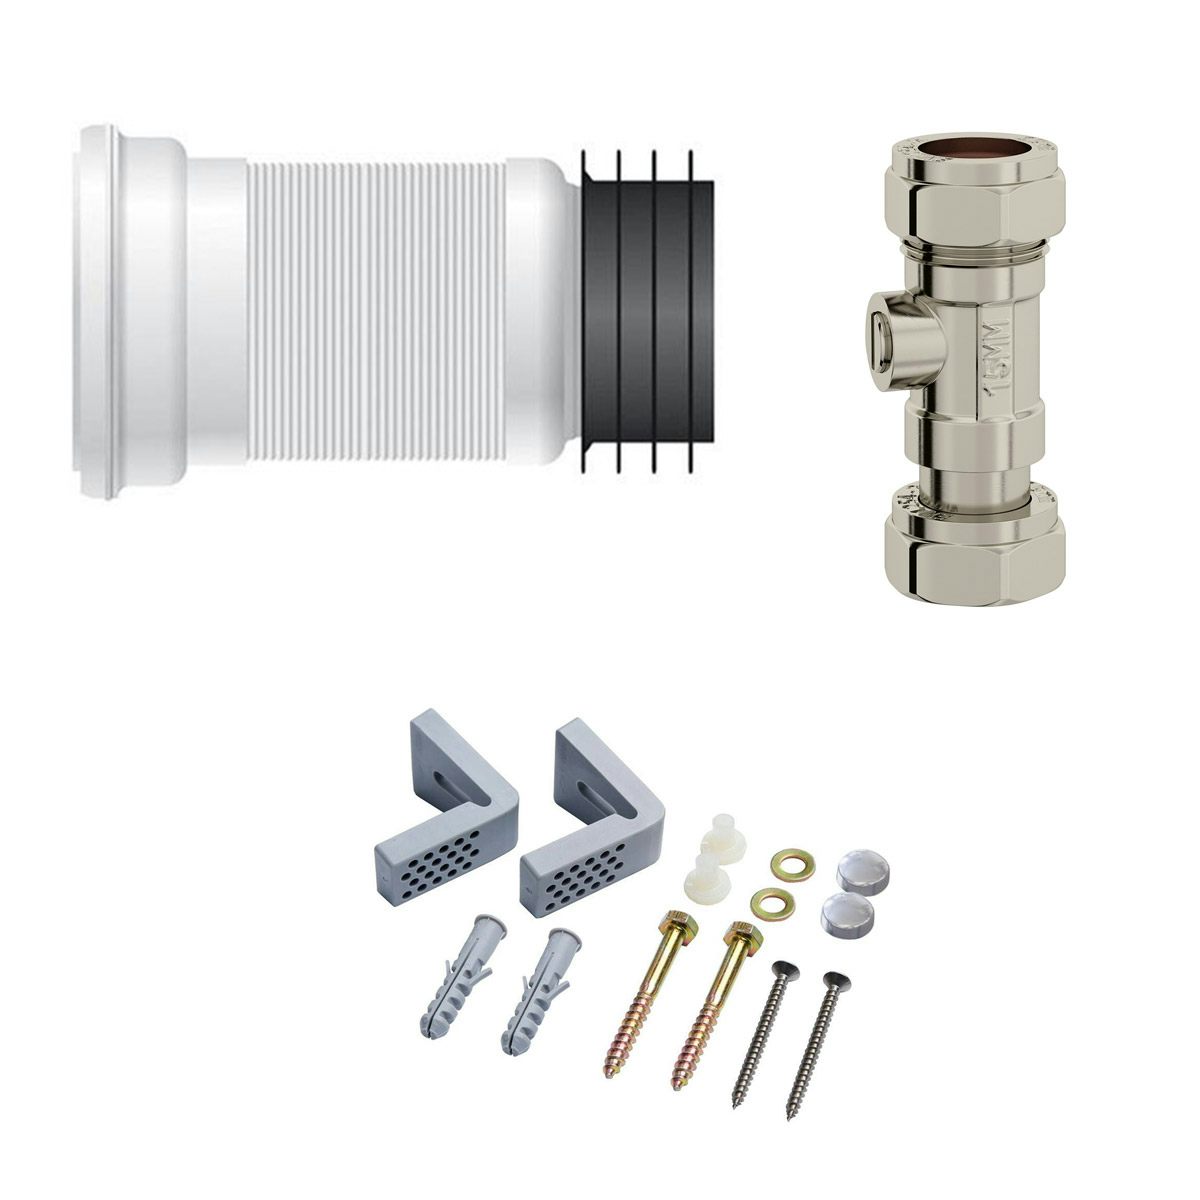 Universal toilet fitting pack